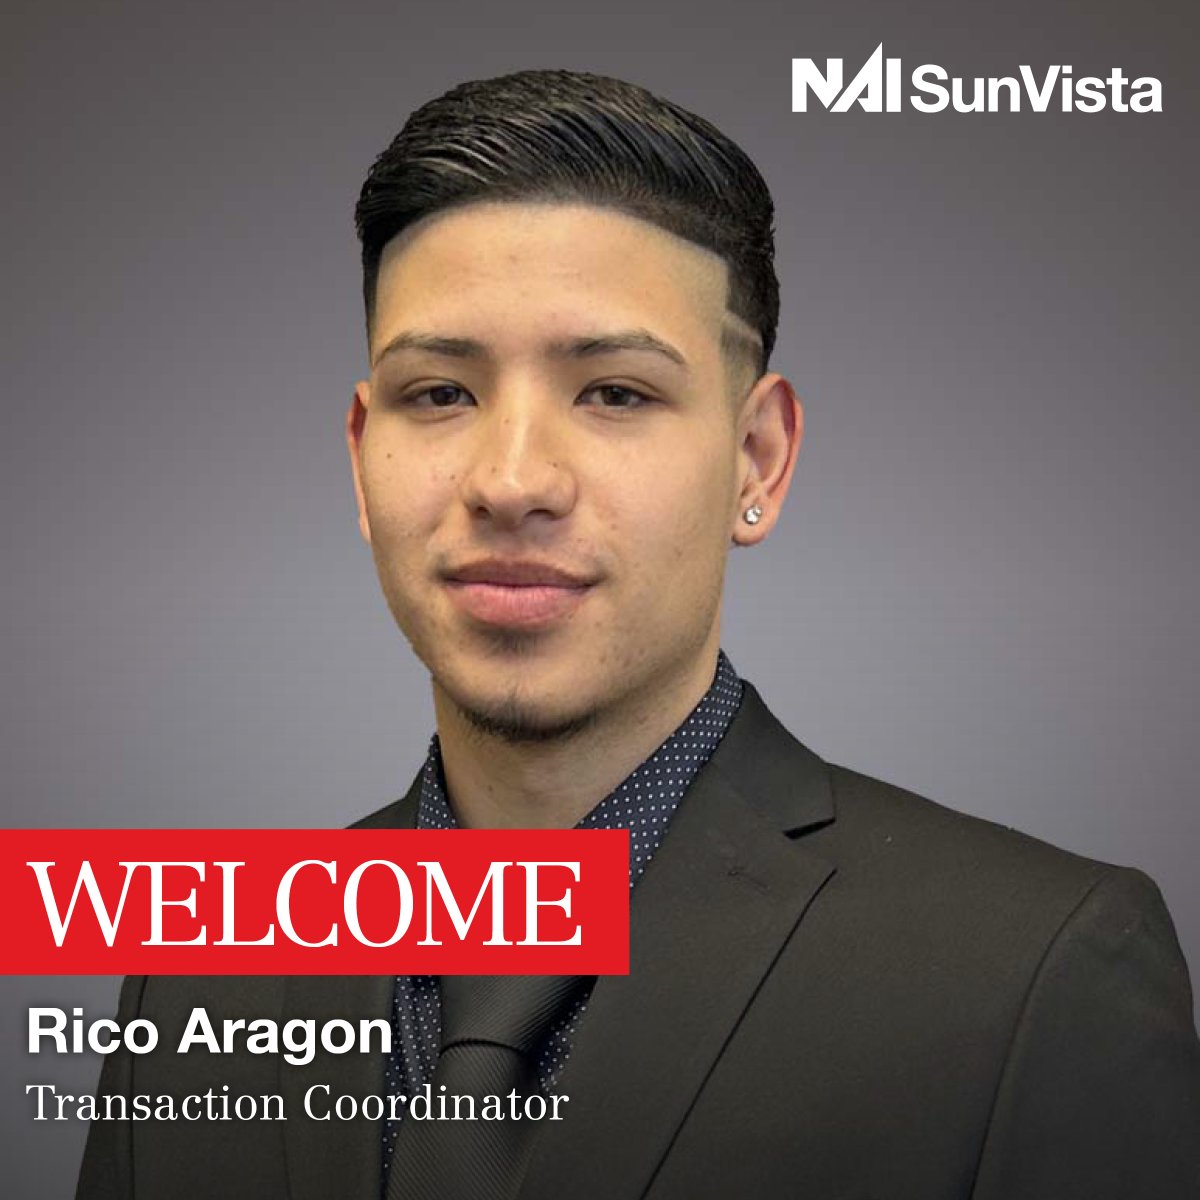 WELCOME ABOARD | We'd like to take a moment to welcome our new Transaction Coordinator, Rico Aragon!

Prior to joining us, Rico was a residential real estate broker, as well as a personal banker, responsible for opening new accounts and initiating home equity loans.

#newmembers